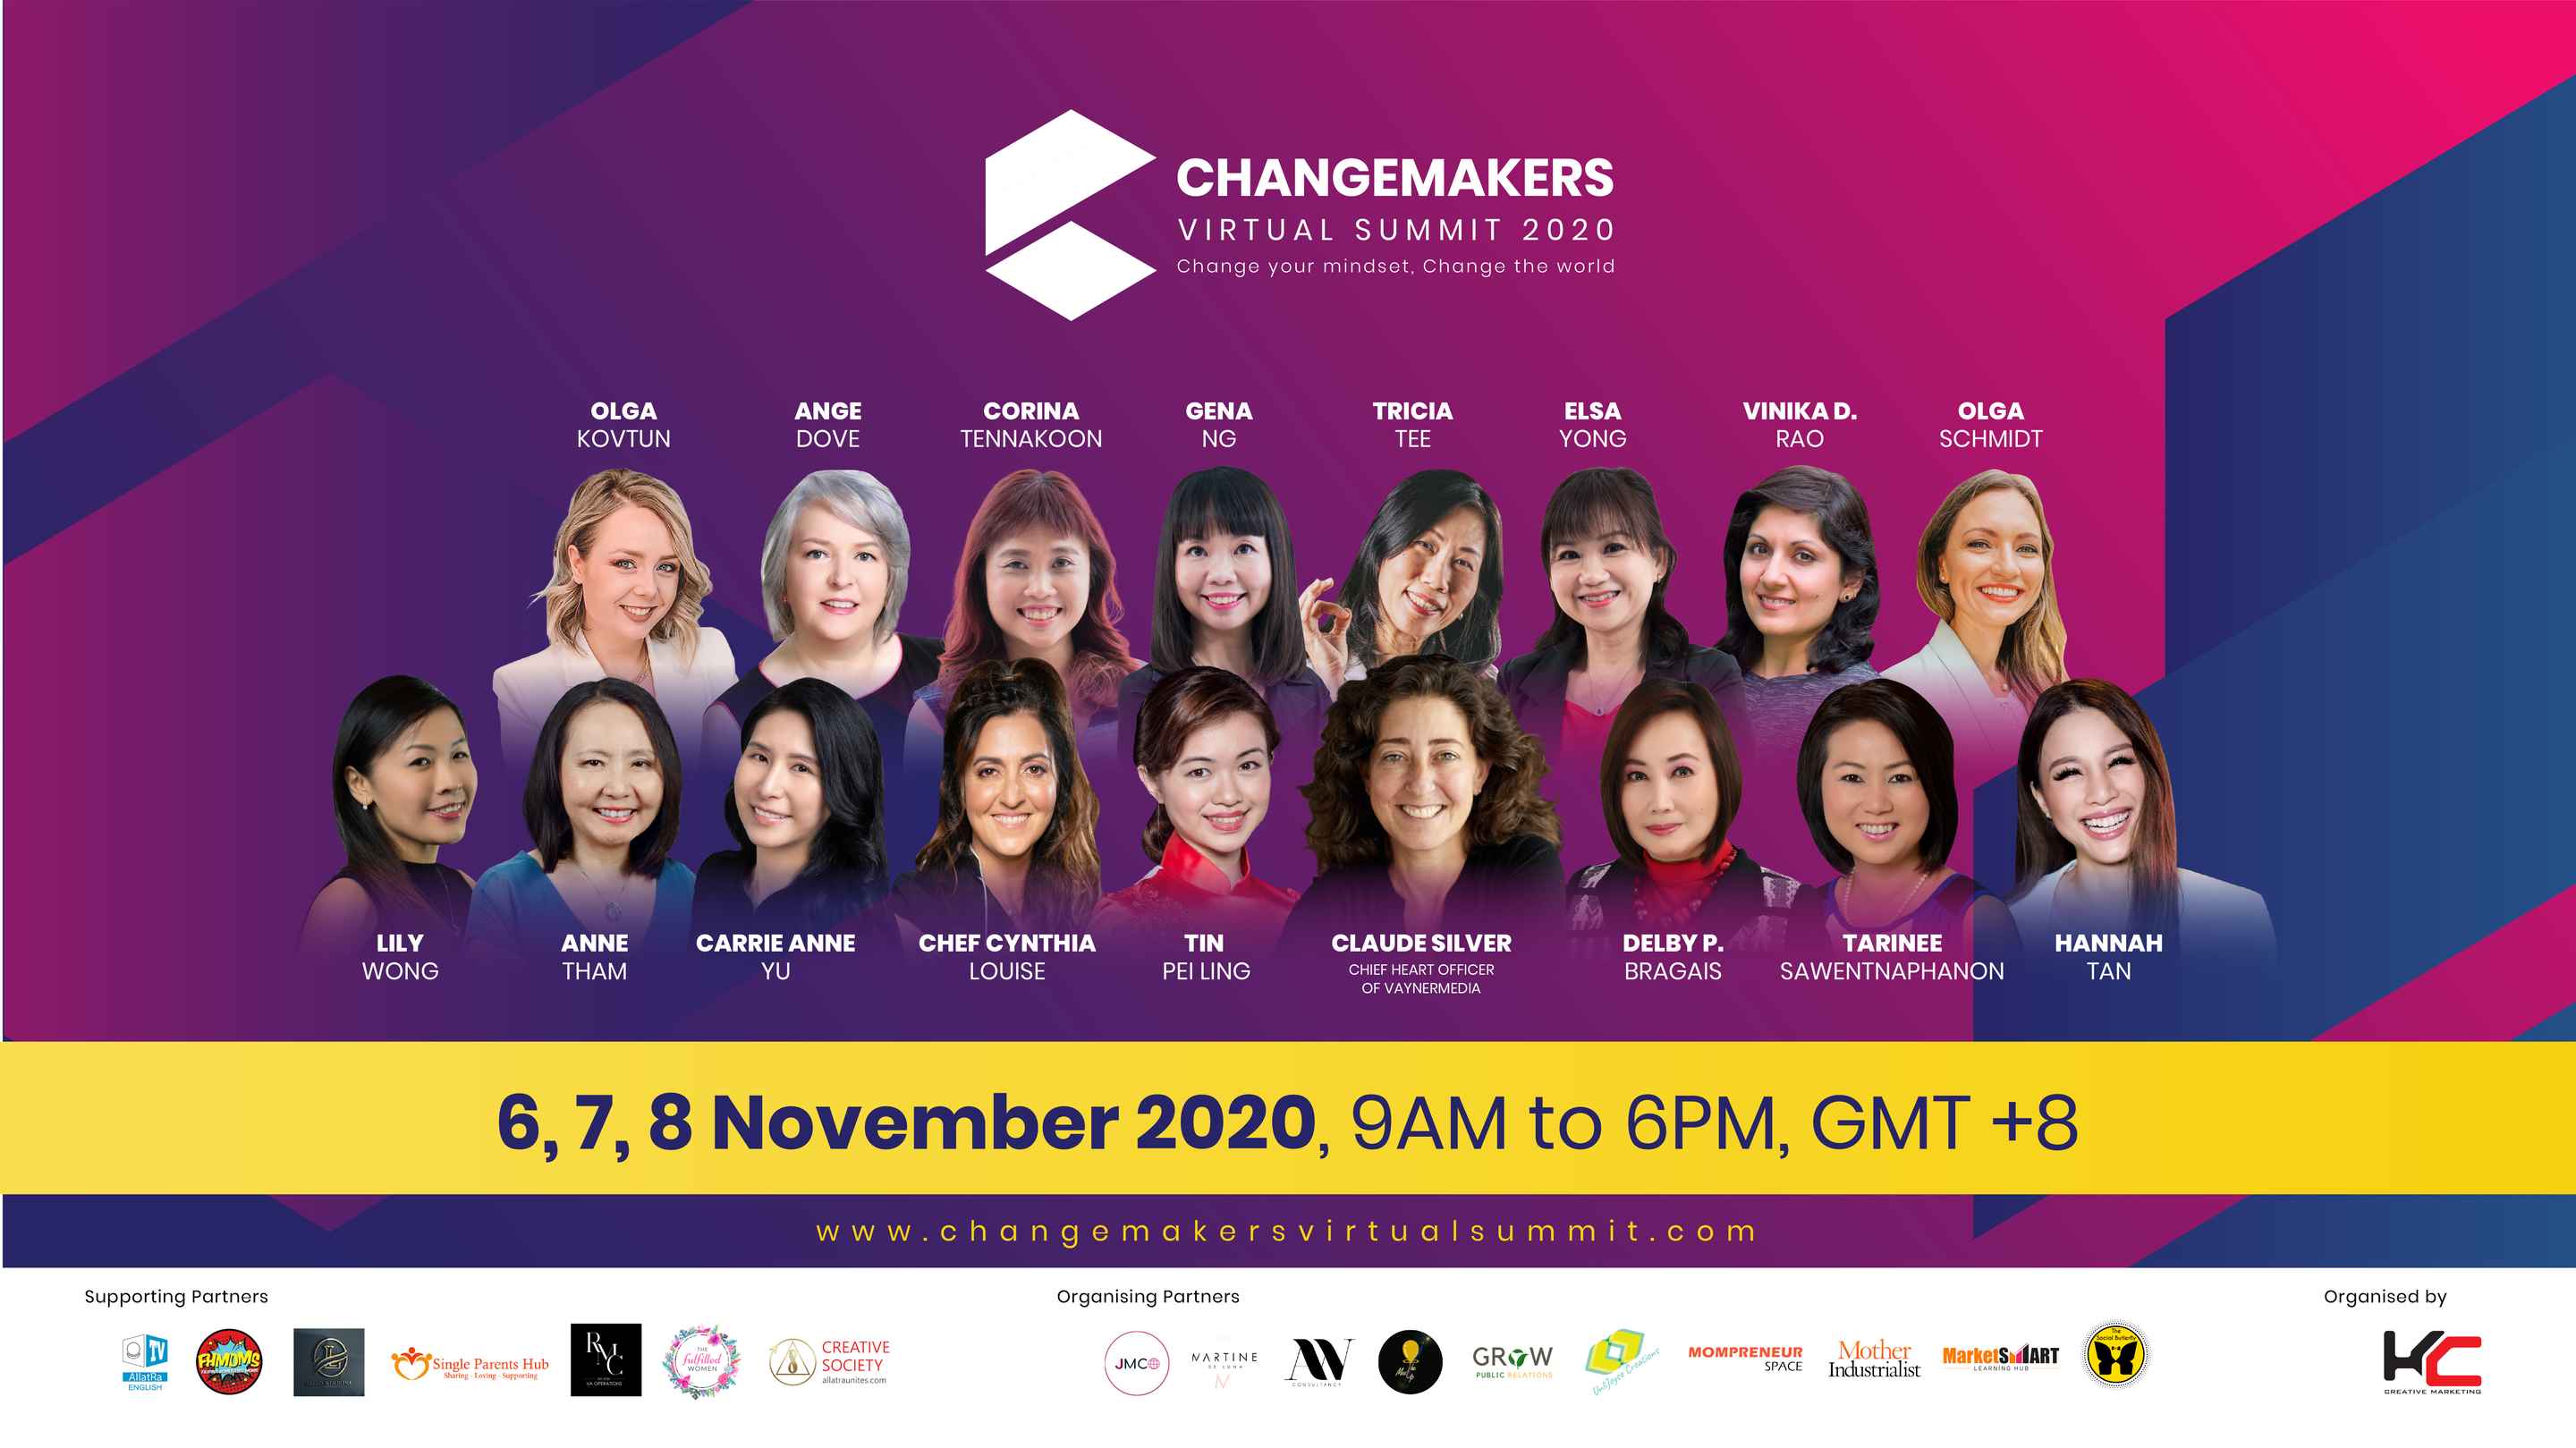 On Nov 2020, Jack & Kenneth launch their inaugural virtual summit - Changemakers Virtual Summit 2020 featuring only female speakers such as Claude Silver (Chief Heart Officer of Vaynermedia), Tin Pei Ling (Elected Member of Parliament in Singapore), Hannah Tan (Media Celebrity in Malaysia) together with their 1st batch of students from the StageClosersSHEROes™️ Mentorship Programme.